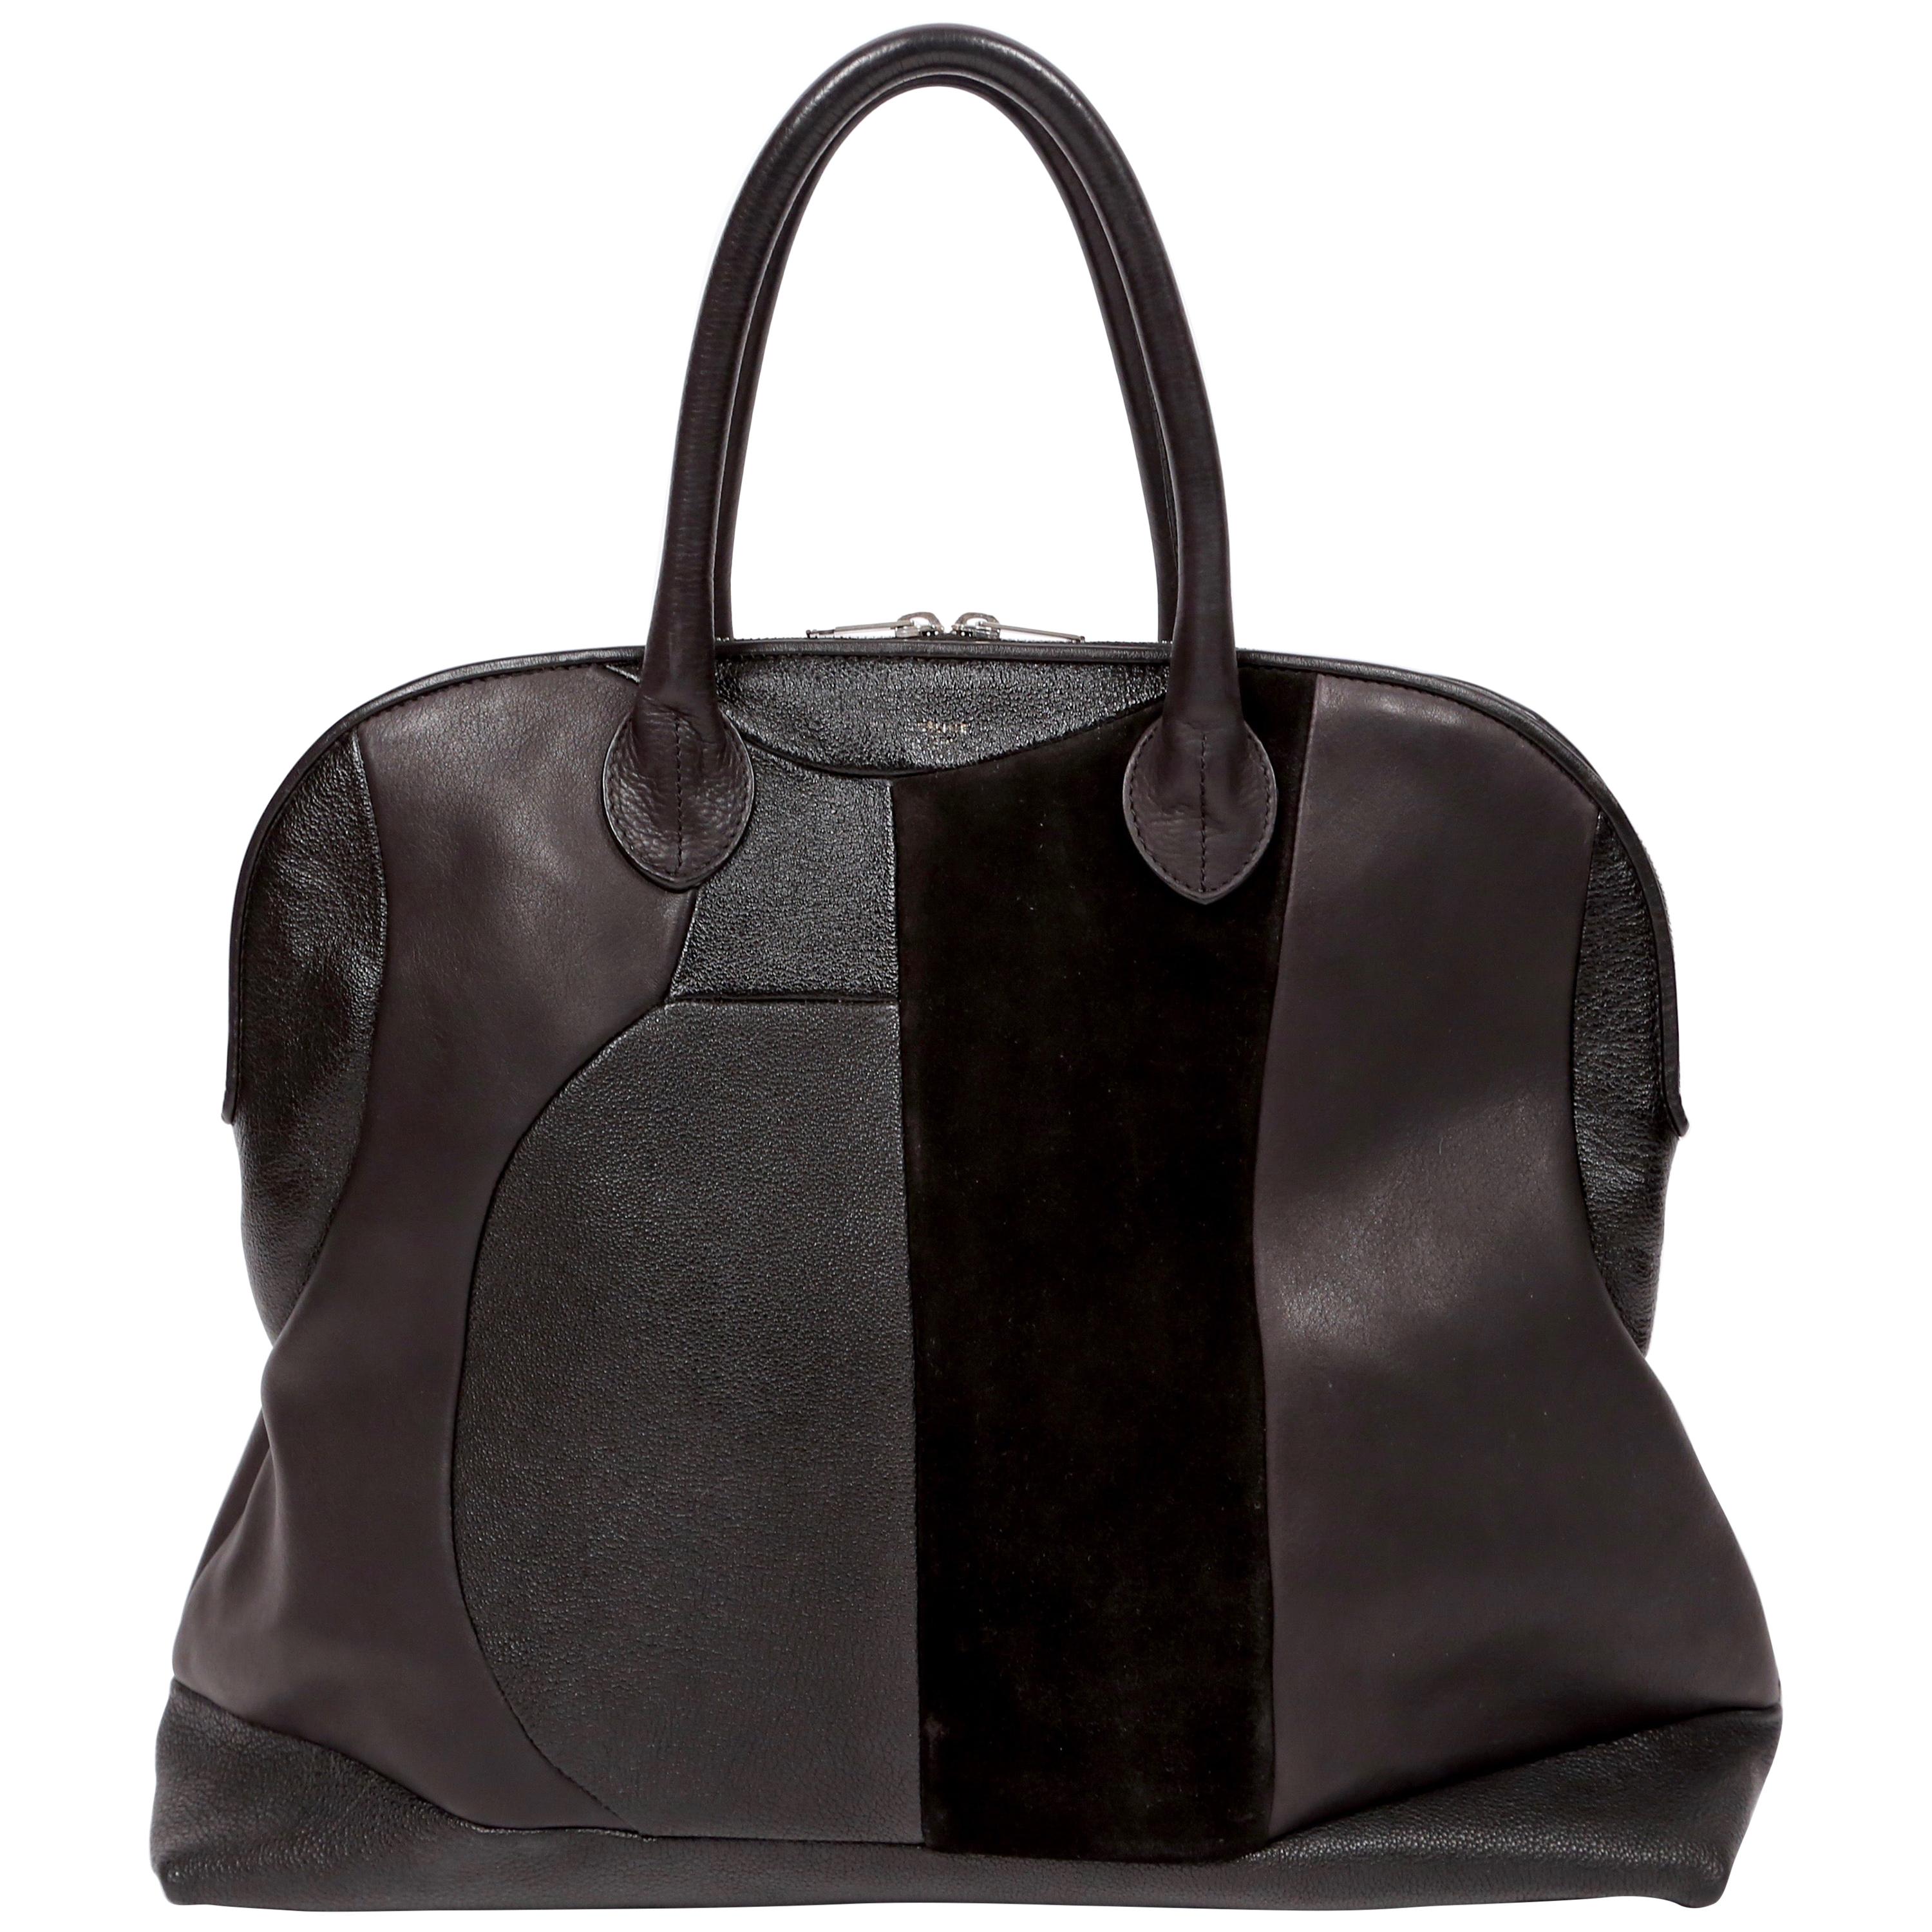 CELINE by PHOEBE PHILO black Leather Patchwork Bowling Duffle Bag